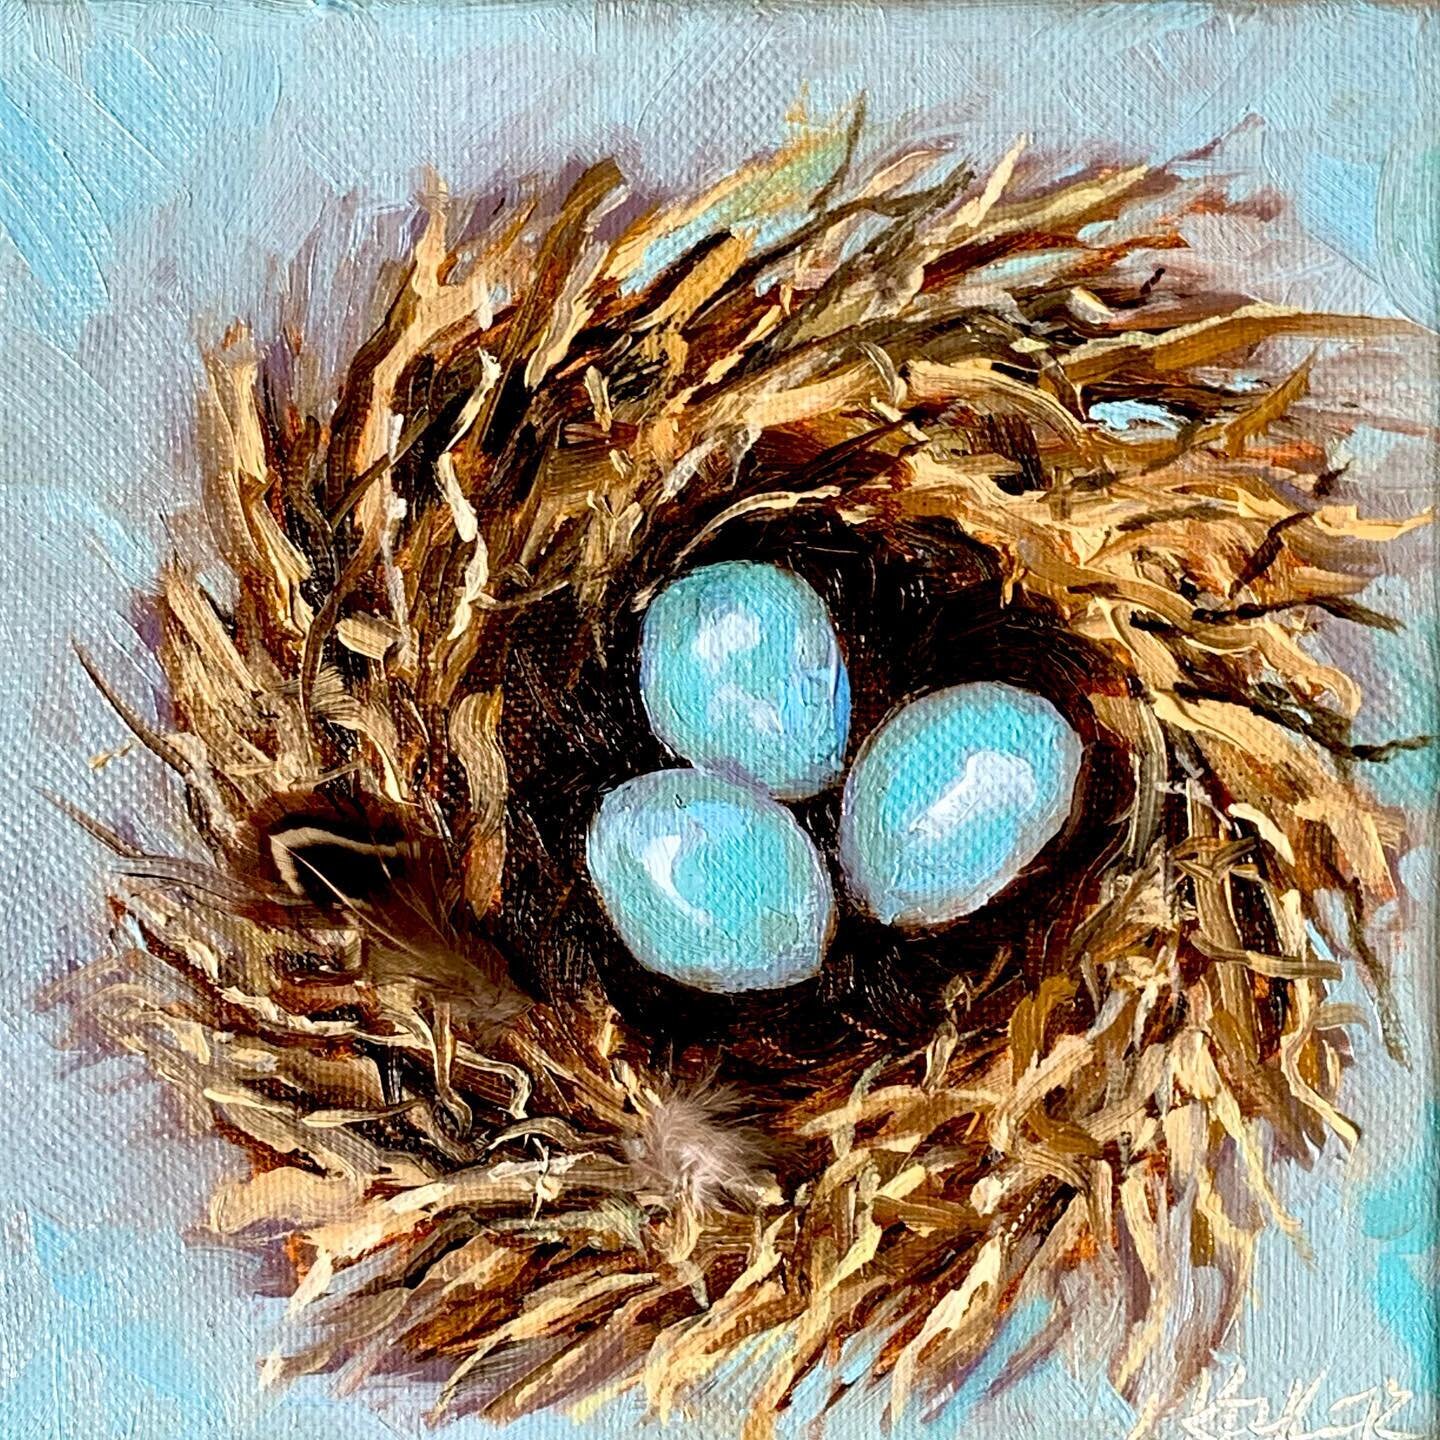 🎨Nest with oils 2.0
Learning, playing...I like the feather addition, but the eggs are driving me crazy!🖌Any oil painter pros with tips?
.
.
.
.
.
.
#artoninstagram #oilpainting #birdnestpainting  #birdsbutterfliesandblooms #nestpainting #theydrawan